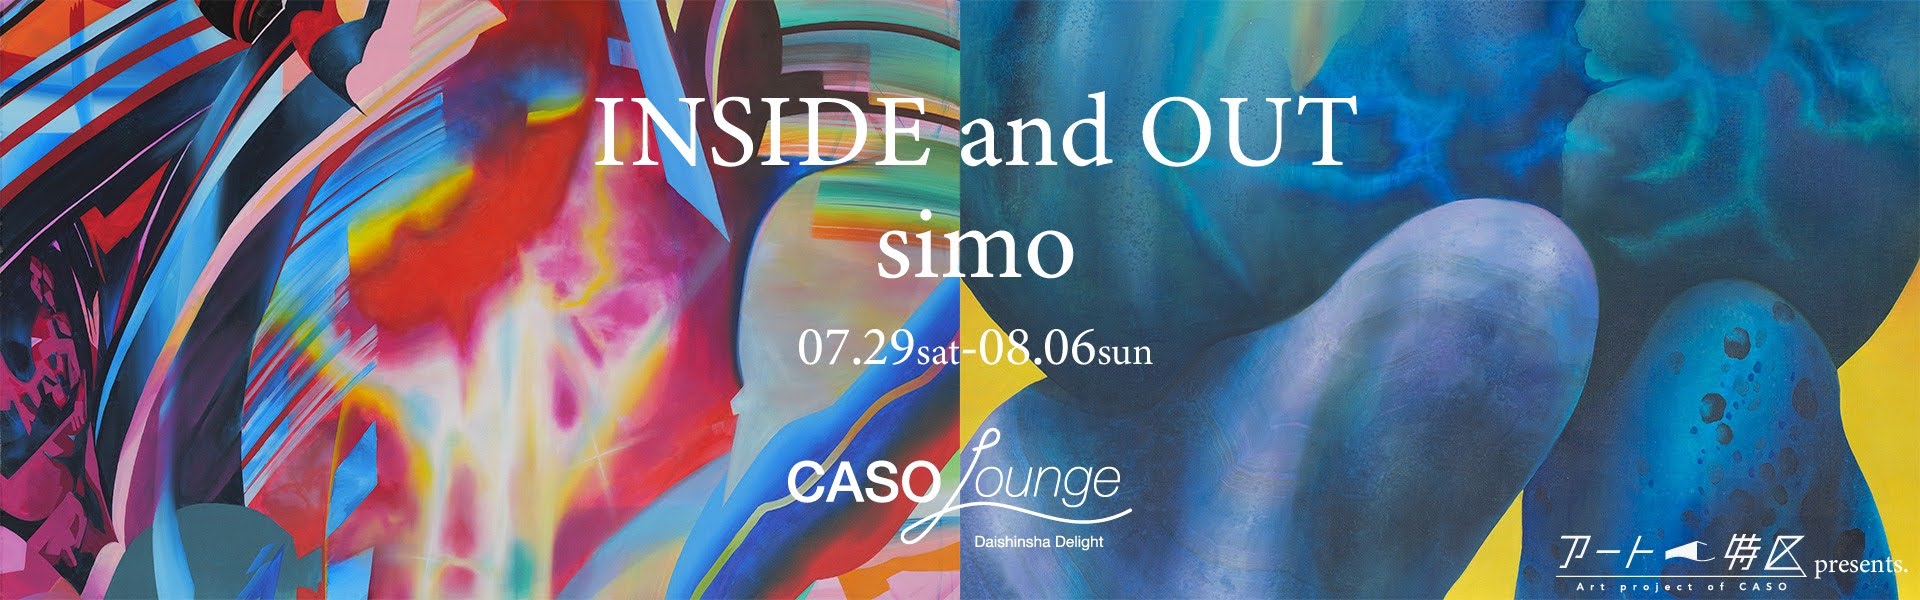 CASOアート特区presents.CASO Lounge 企画個展第二弾 simo exhibition   ‘INSIDE and OUT’イベントレポート